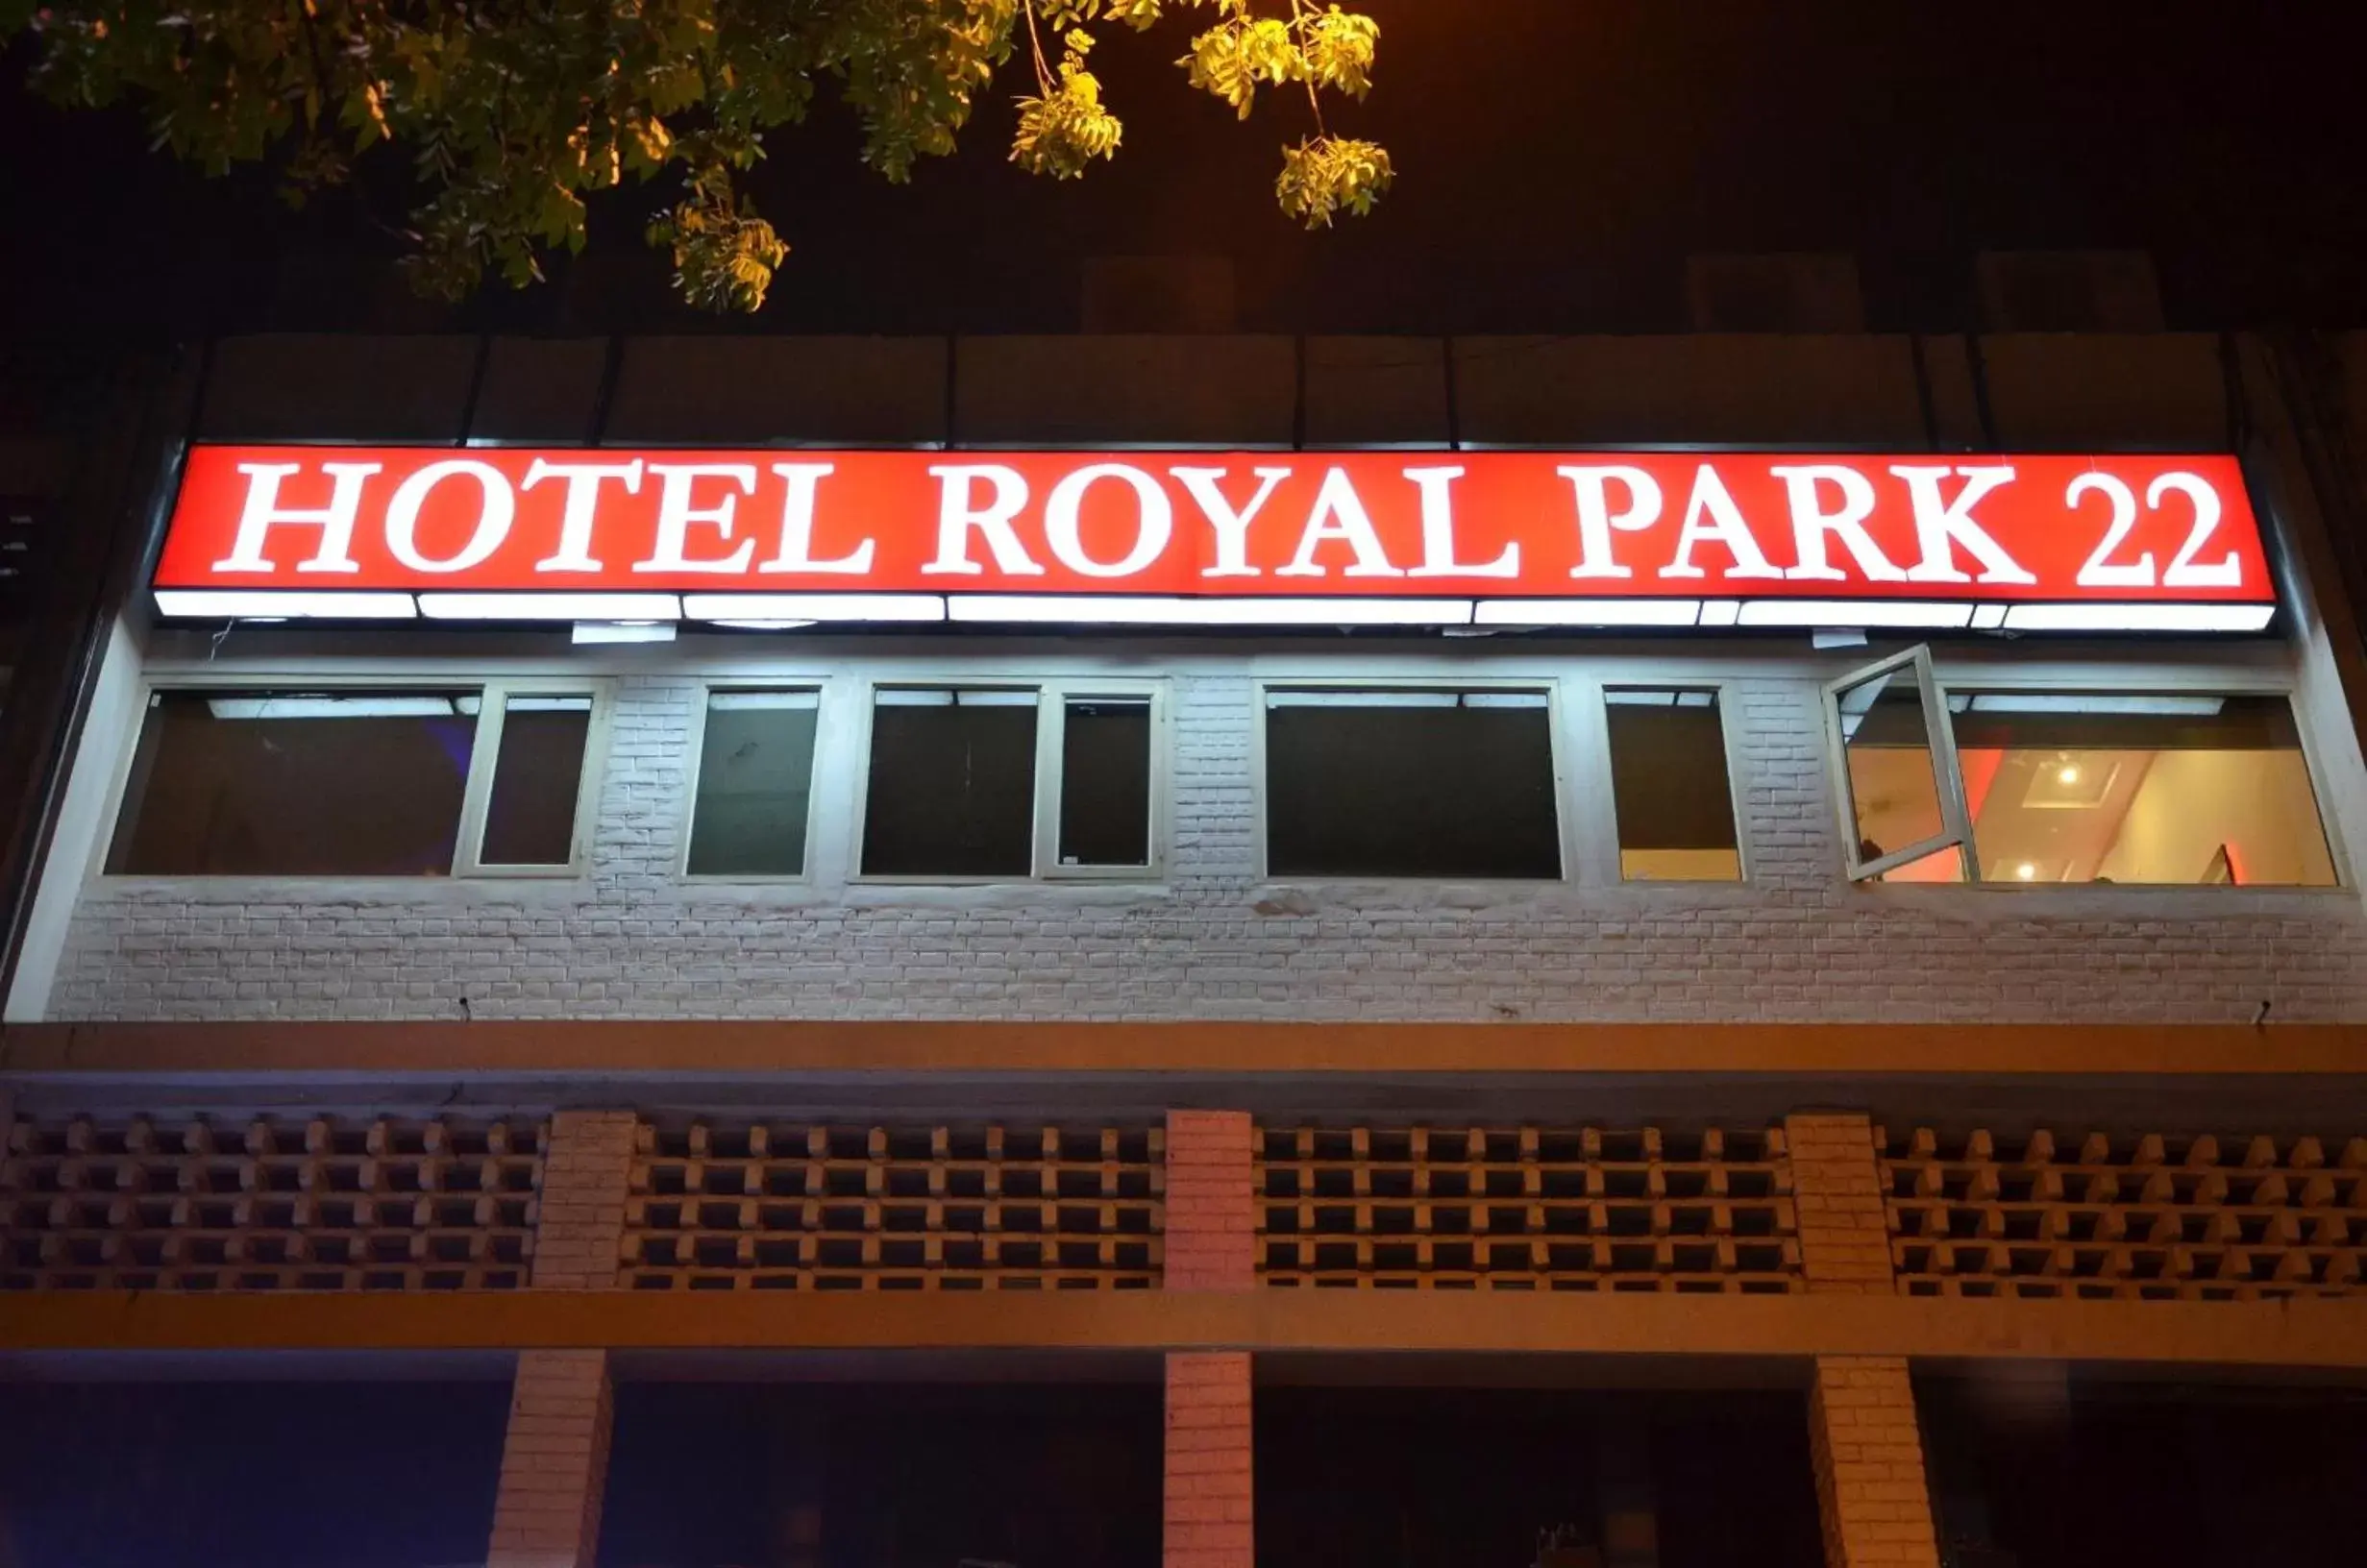 Property Building in Hotel Royal Park 22